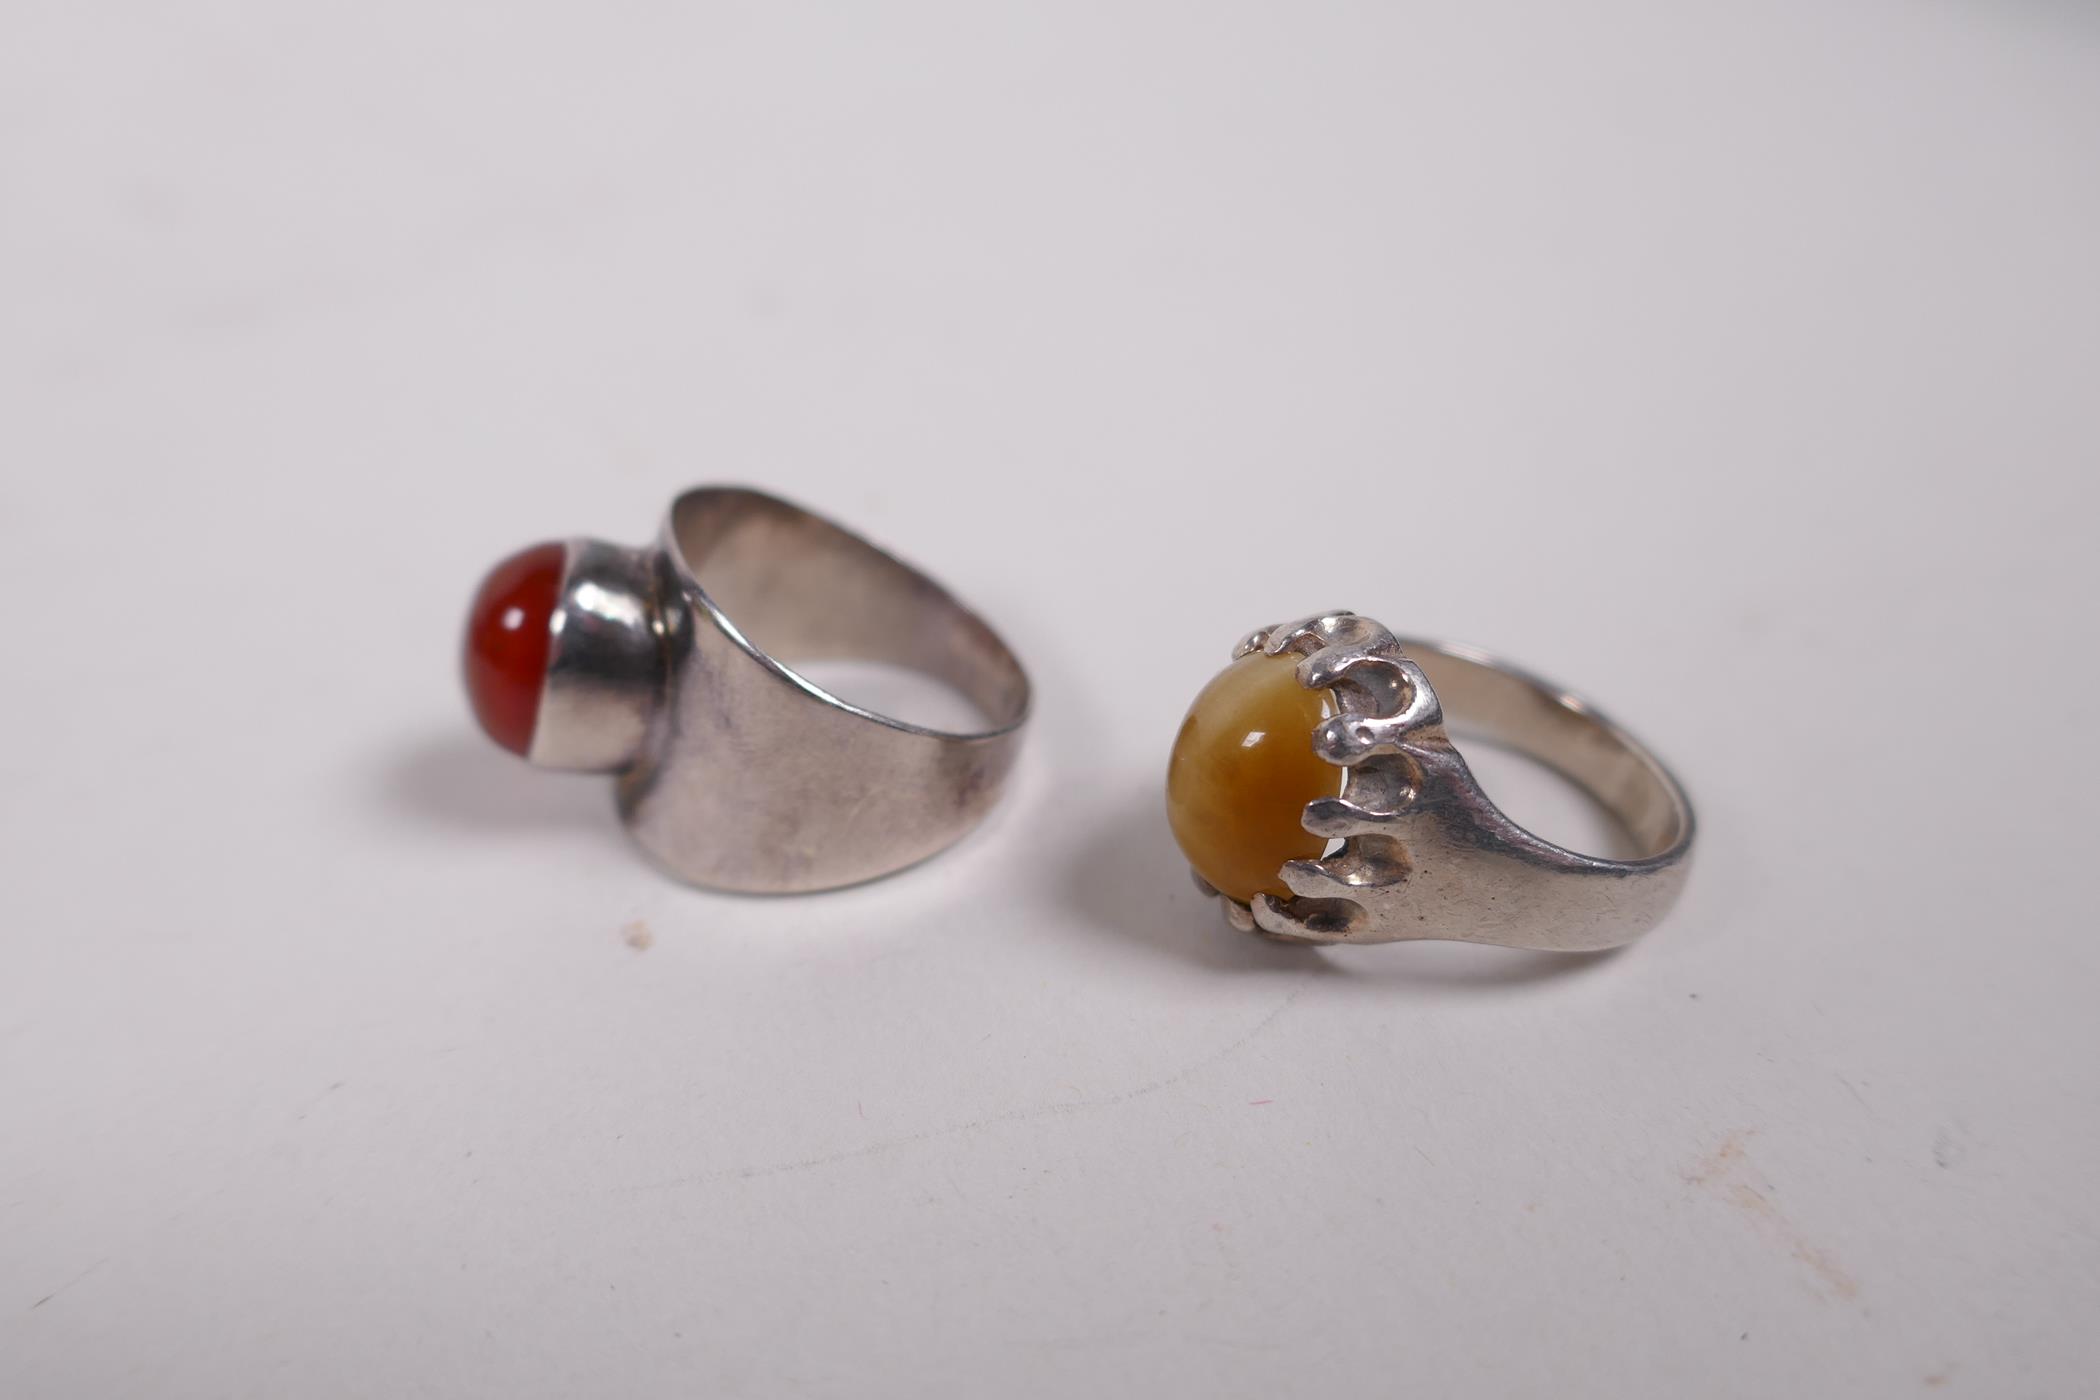 Five silver and white metal rings set with coral and semi-precious stones - Image 4 of 4